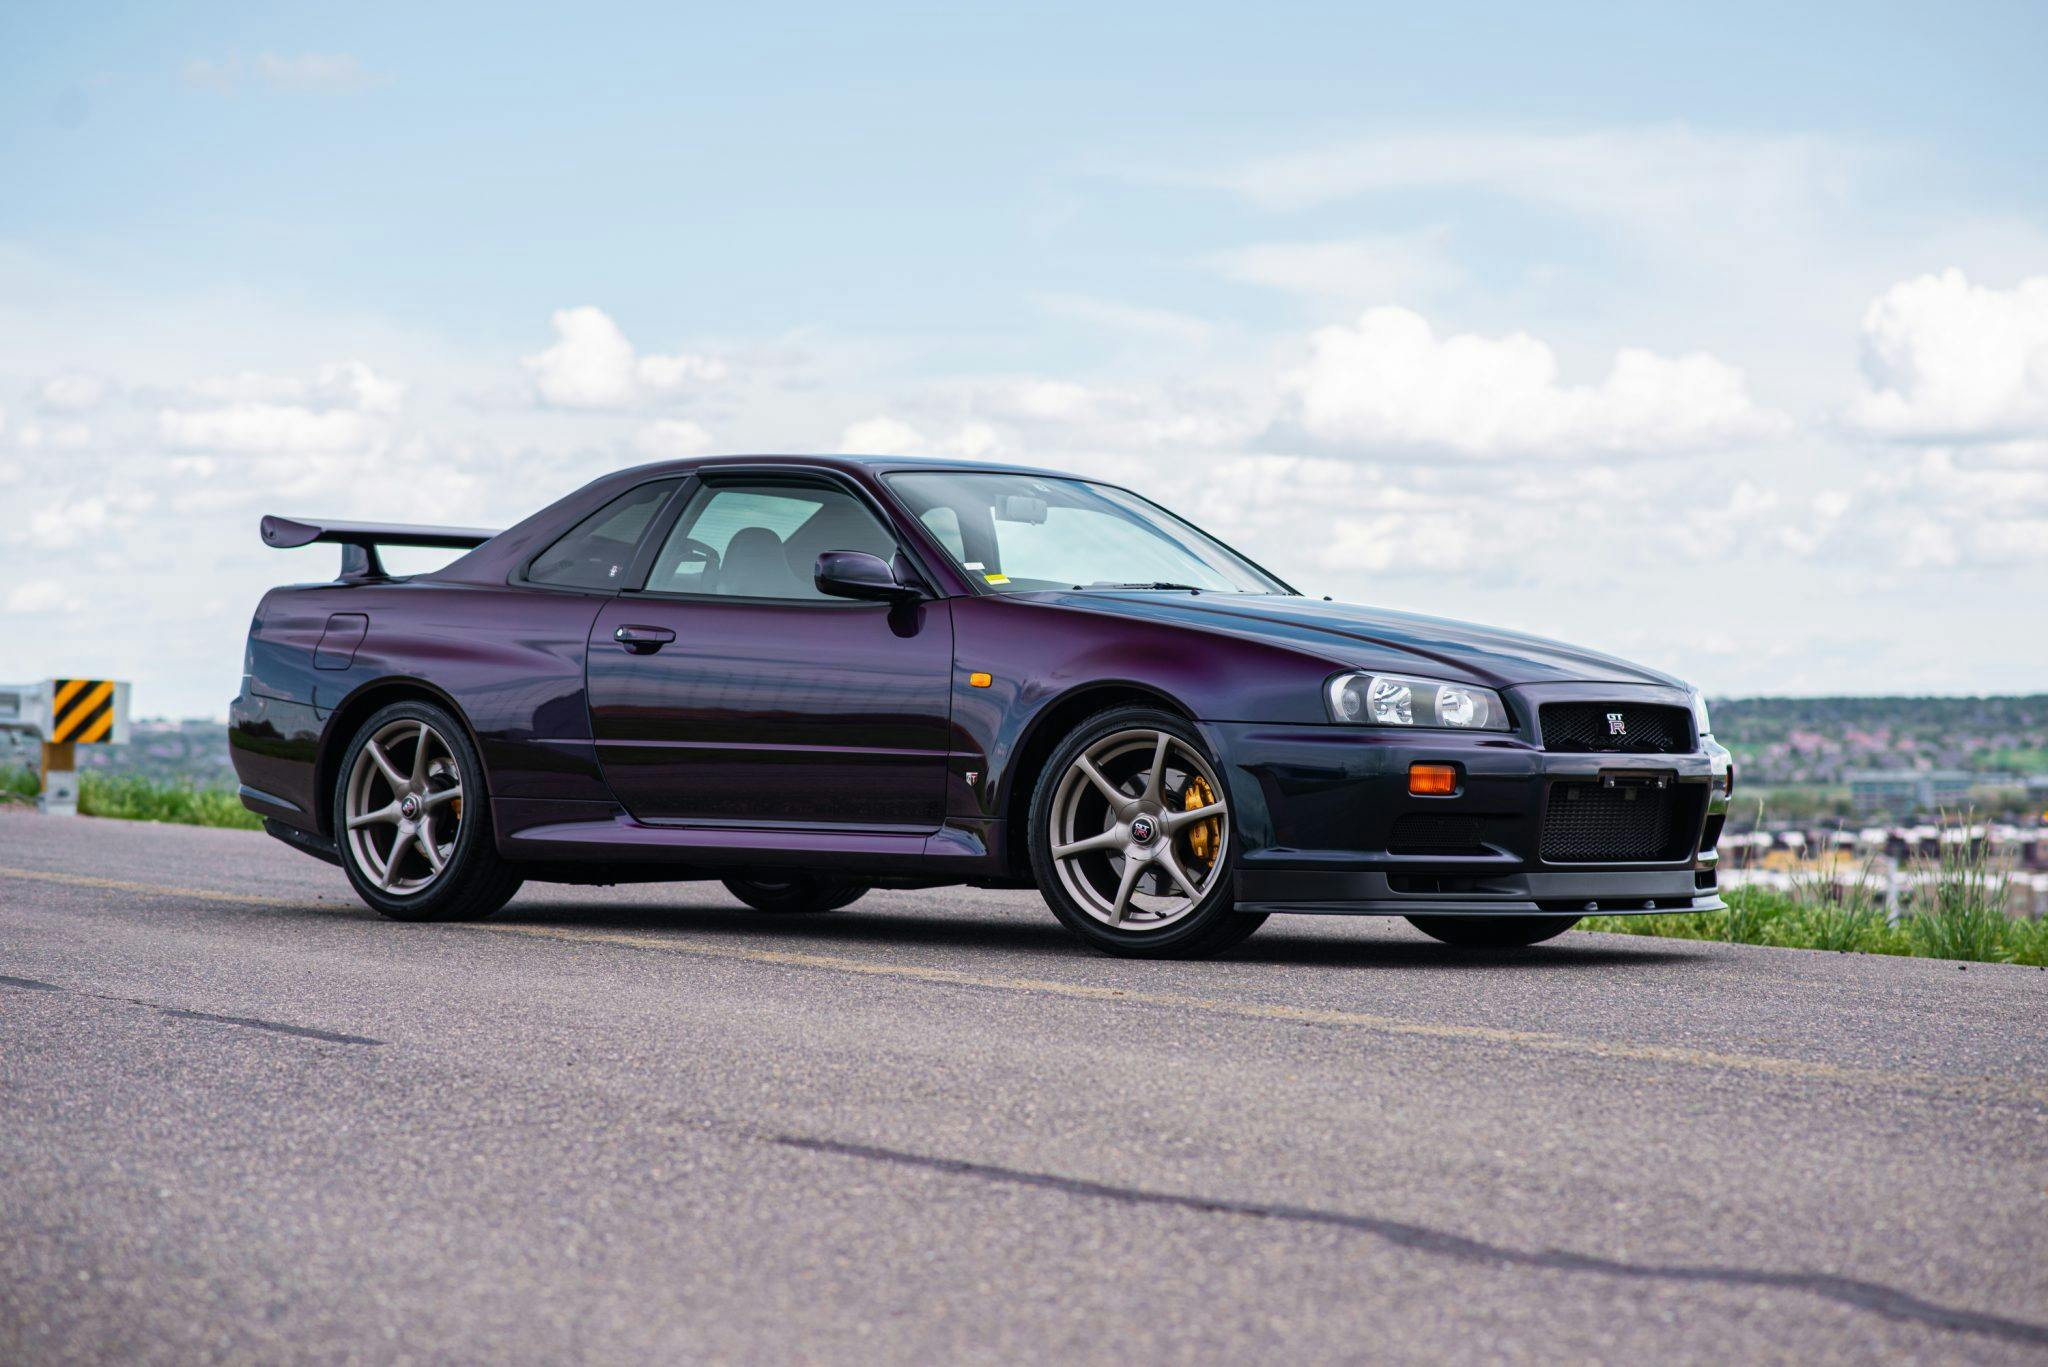  R34 Skyline GT-R sells for record-breaking $320,187: UPDATED -  Hagerty Media